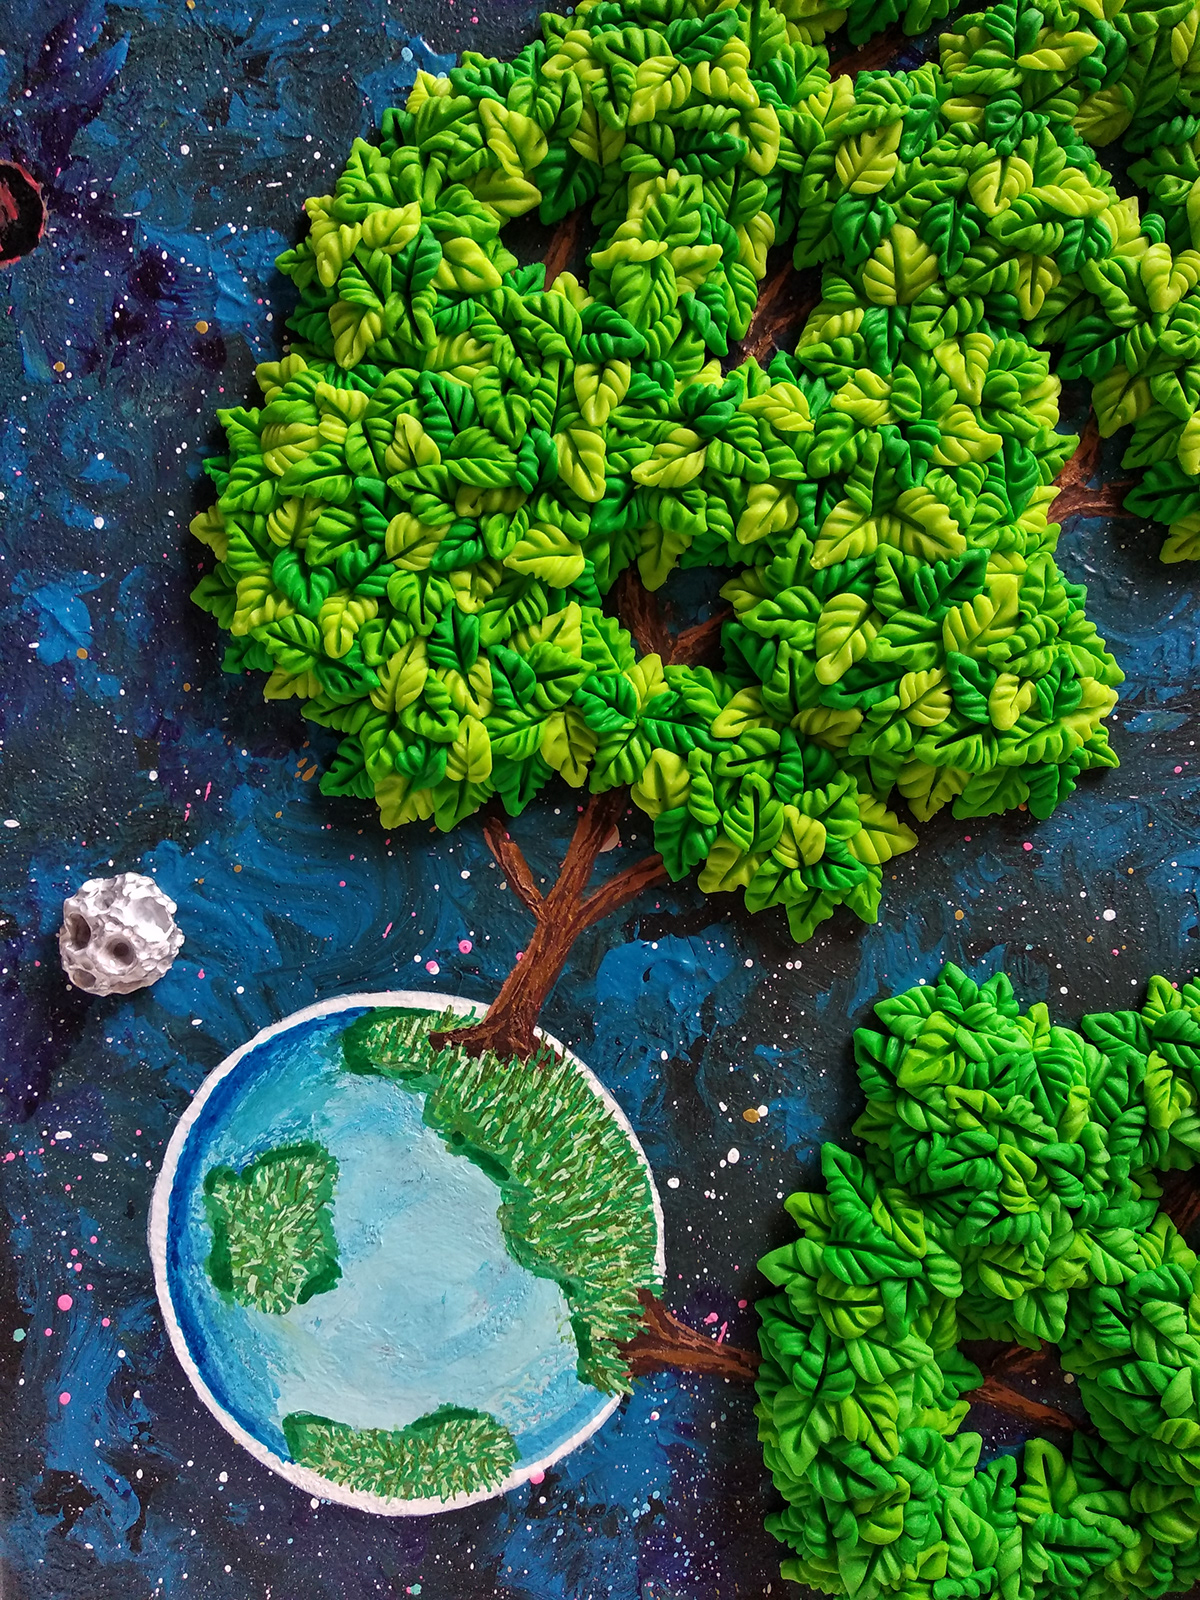 Tree  Space  planet blue green moon fimo Plasticine polymer clay acrylic painting